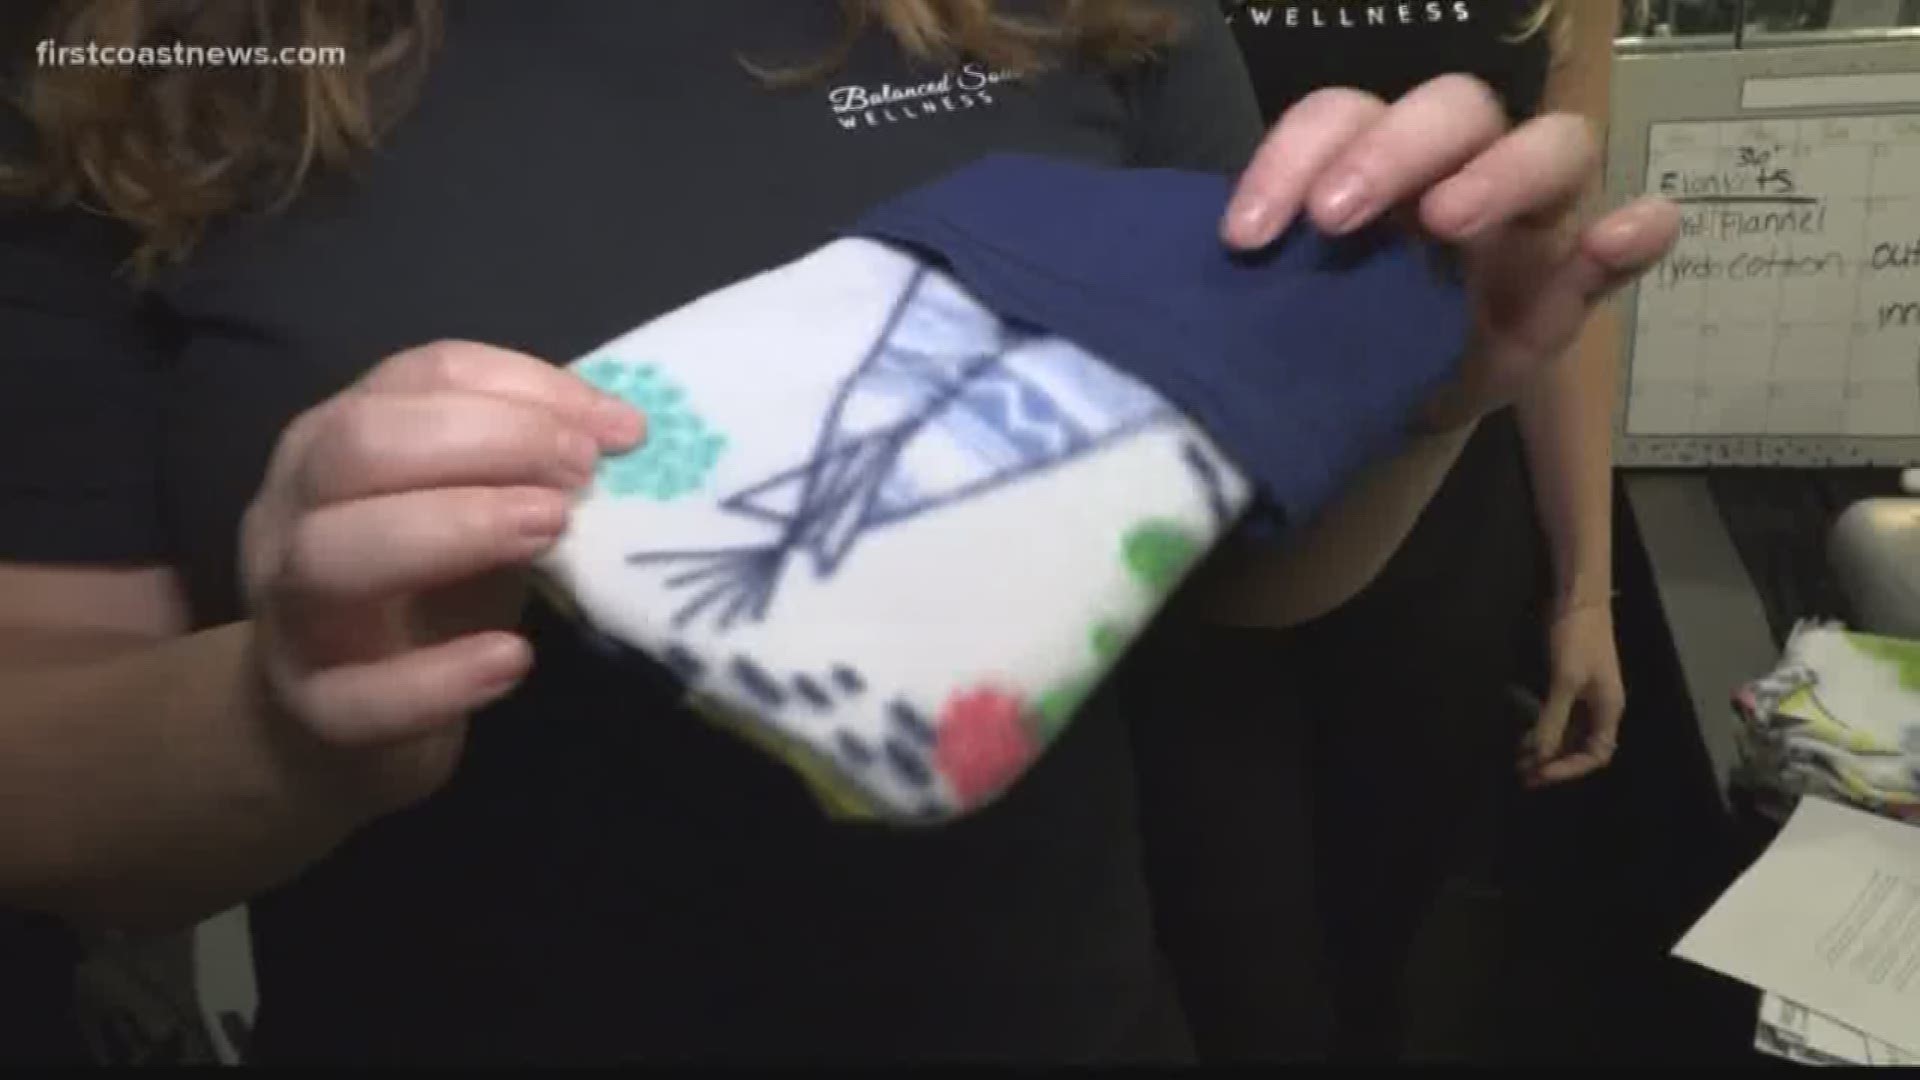 Volunteers at Balanced Soul Wellness are making pouches for animals like young kangaroos and koalas that lost their mothers.